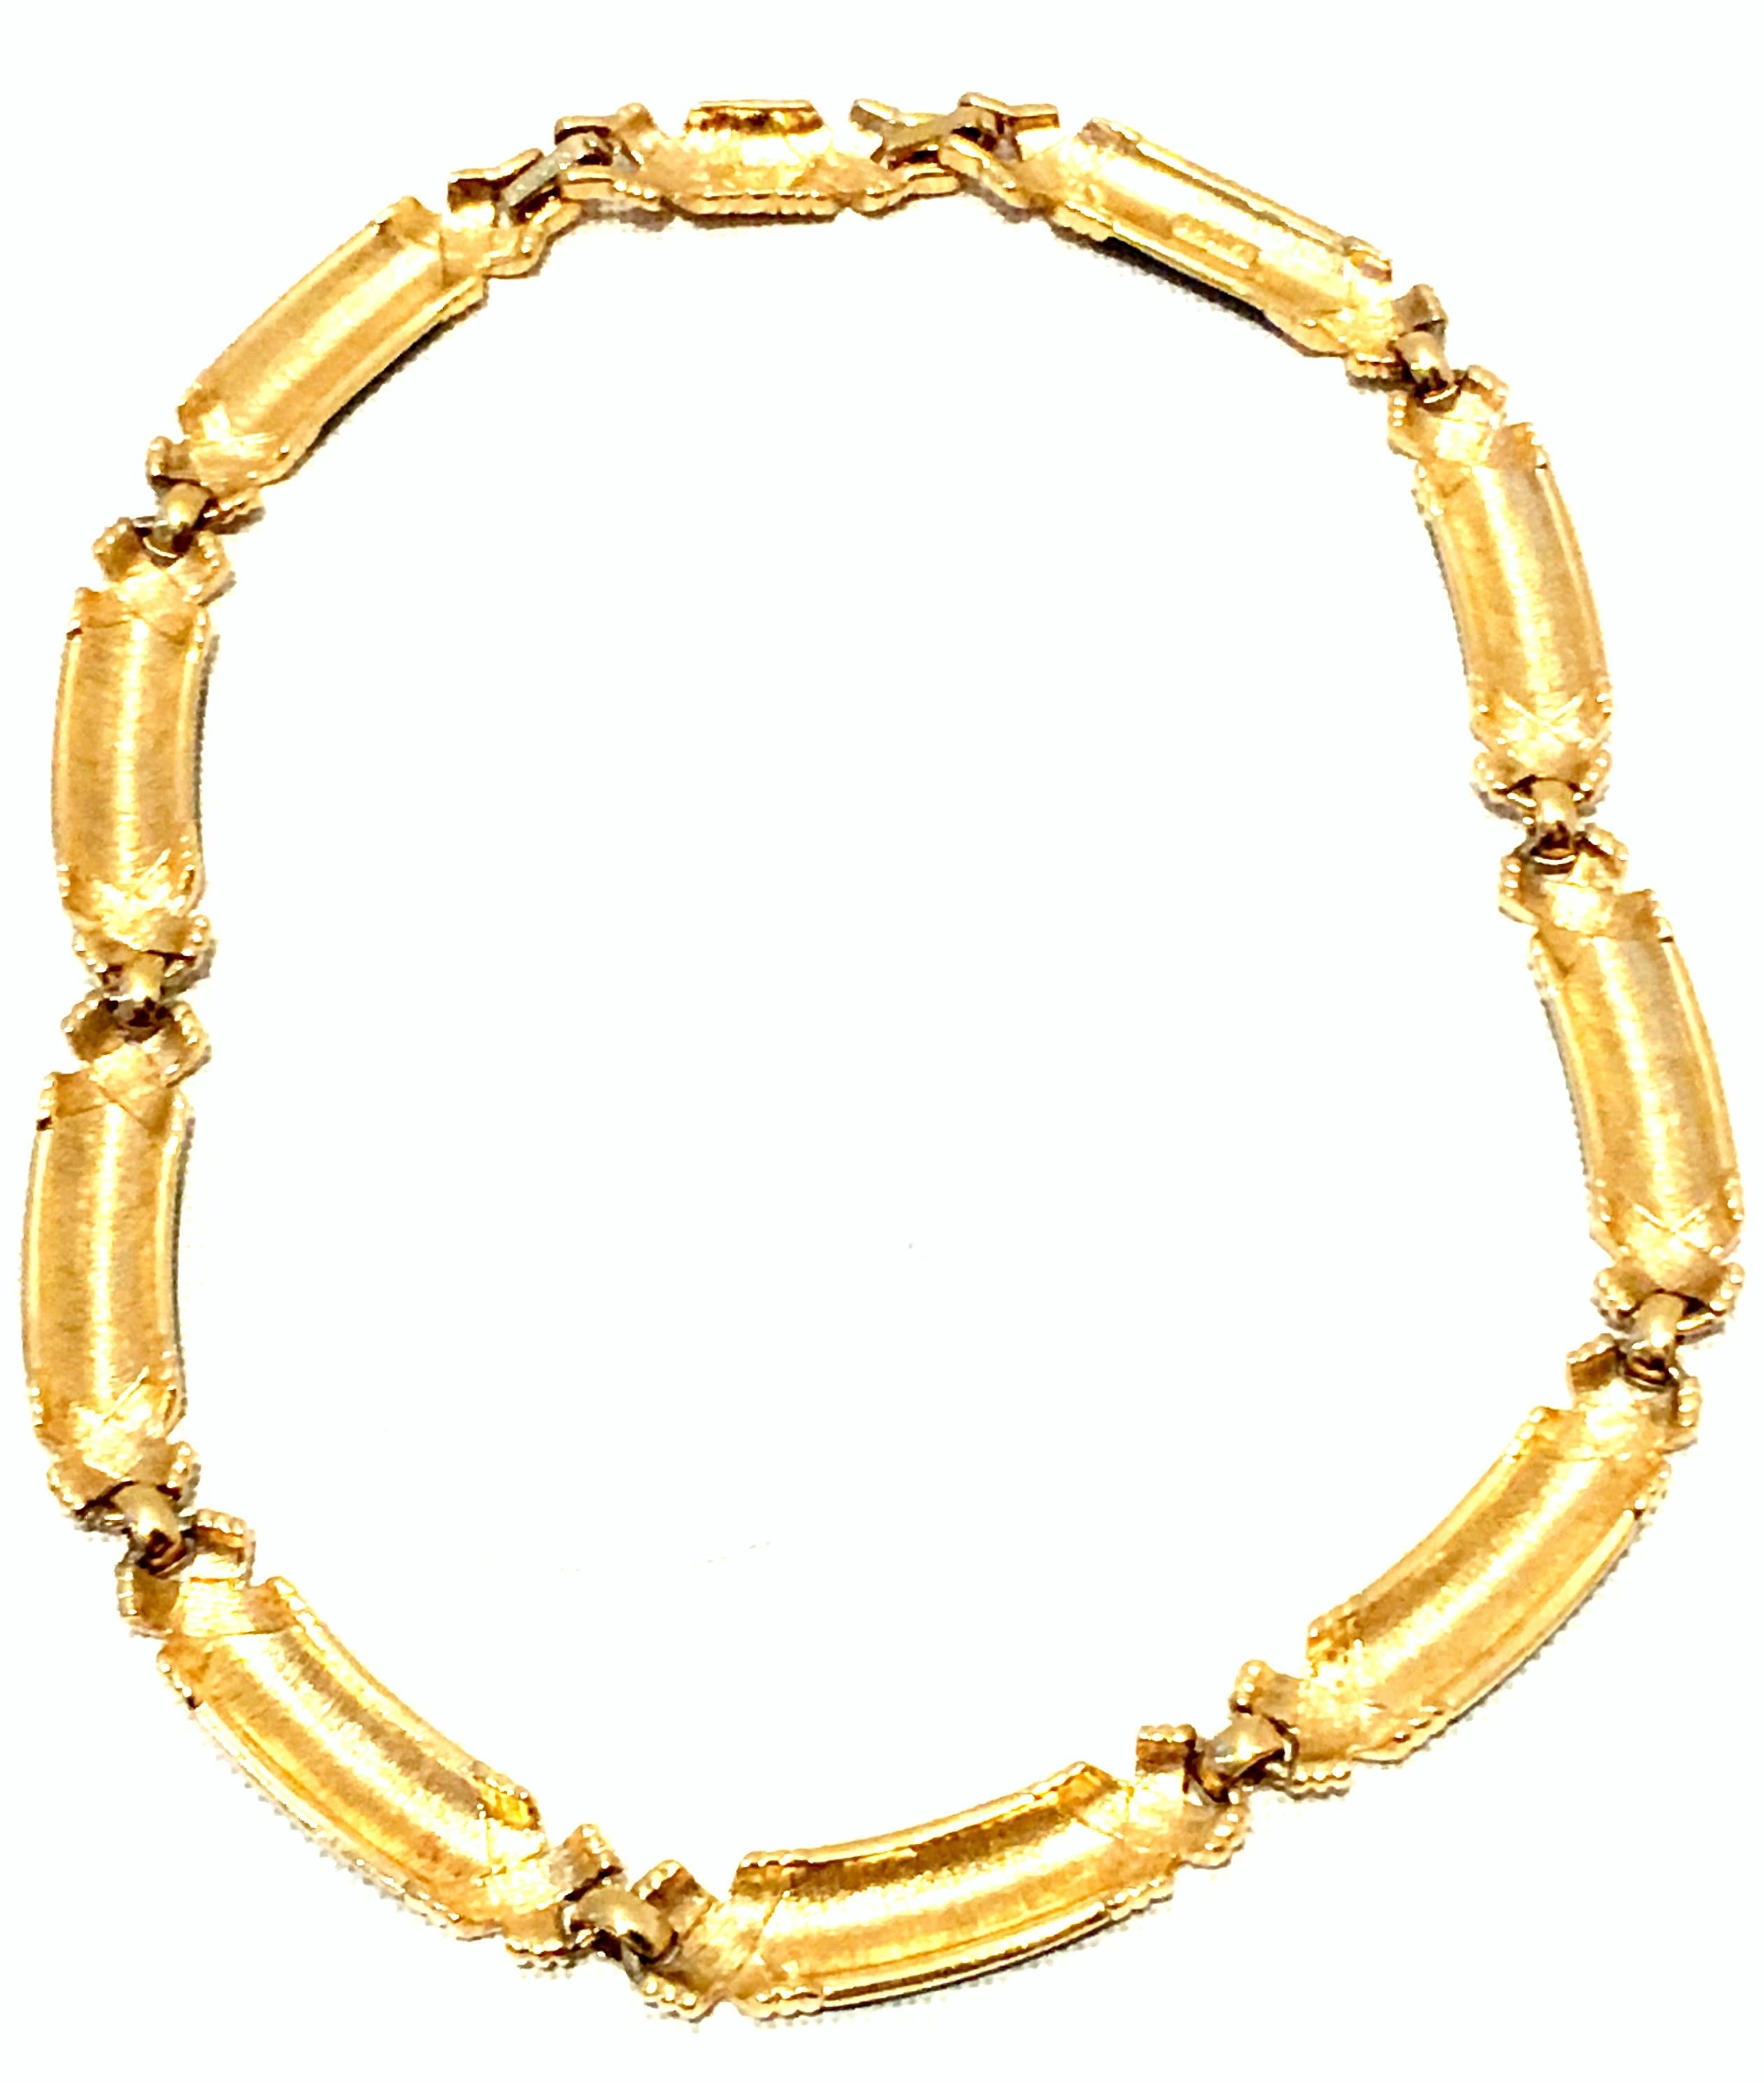 20th Century Gold & Enamel Choker Style Link Necklace By, Monet 6